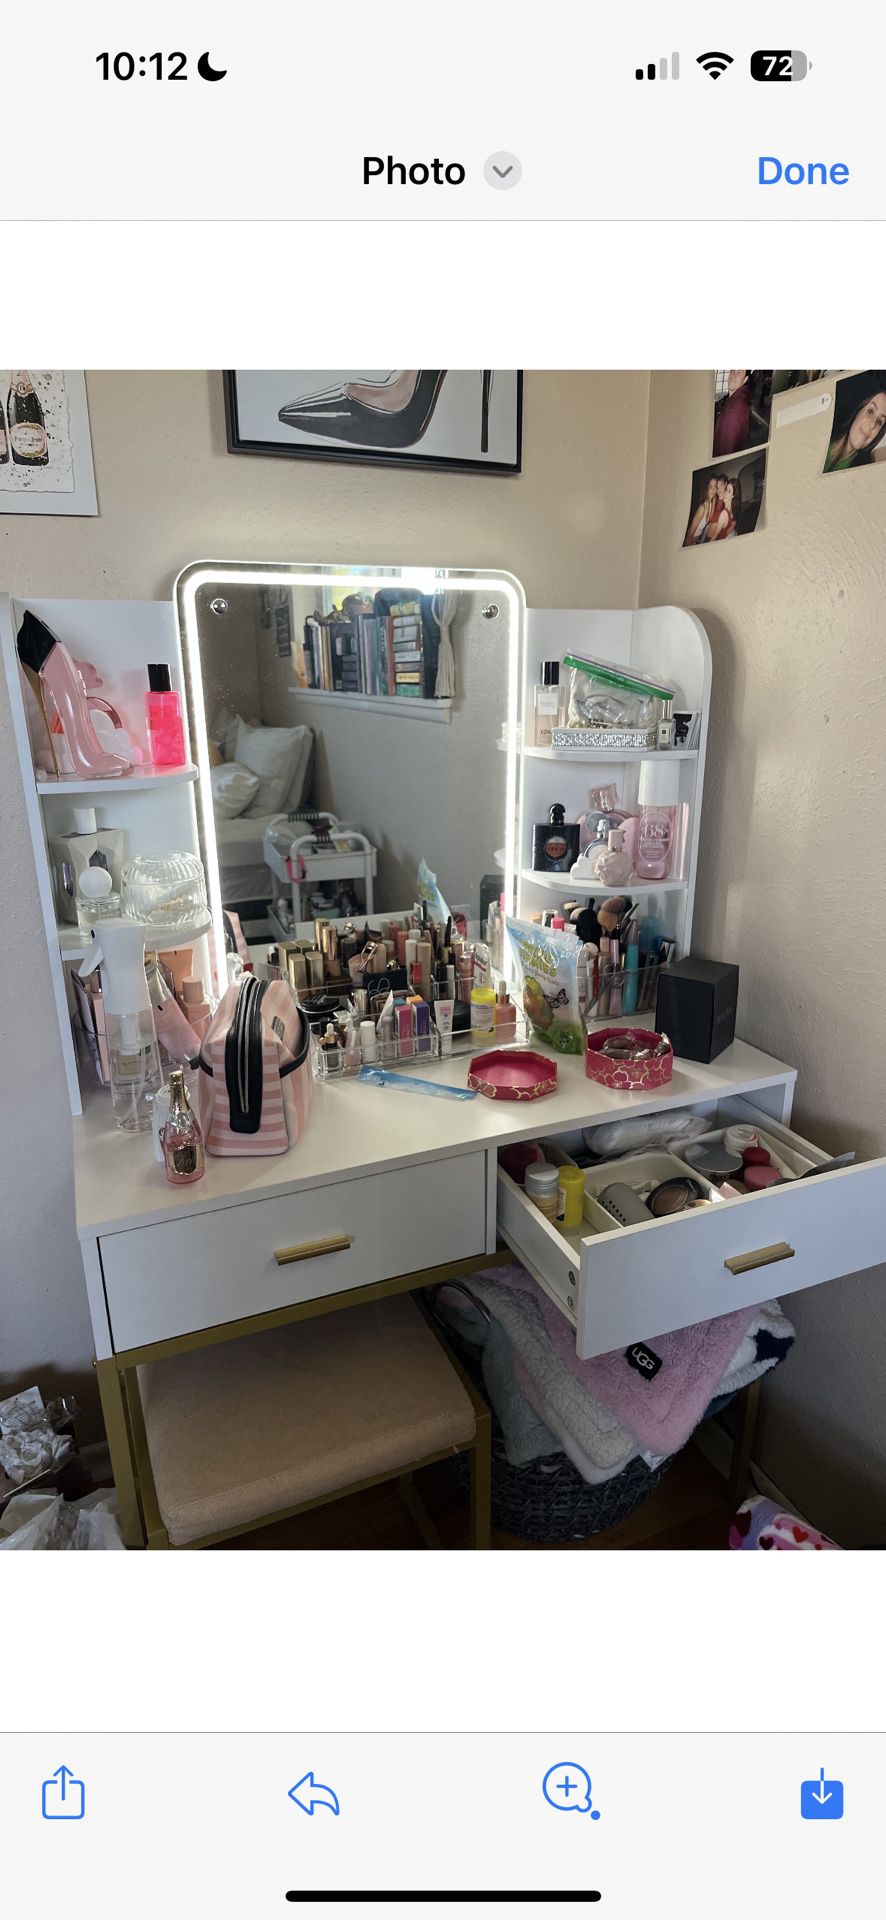 VANITY (MAKEUP IN PICTURE NOT INCLUDED)